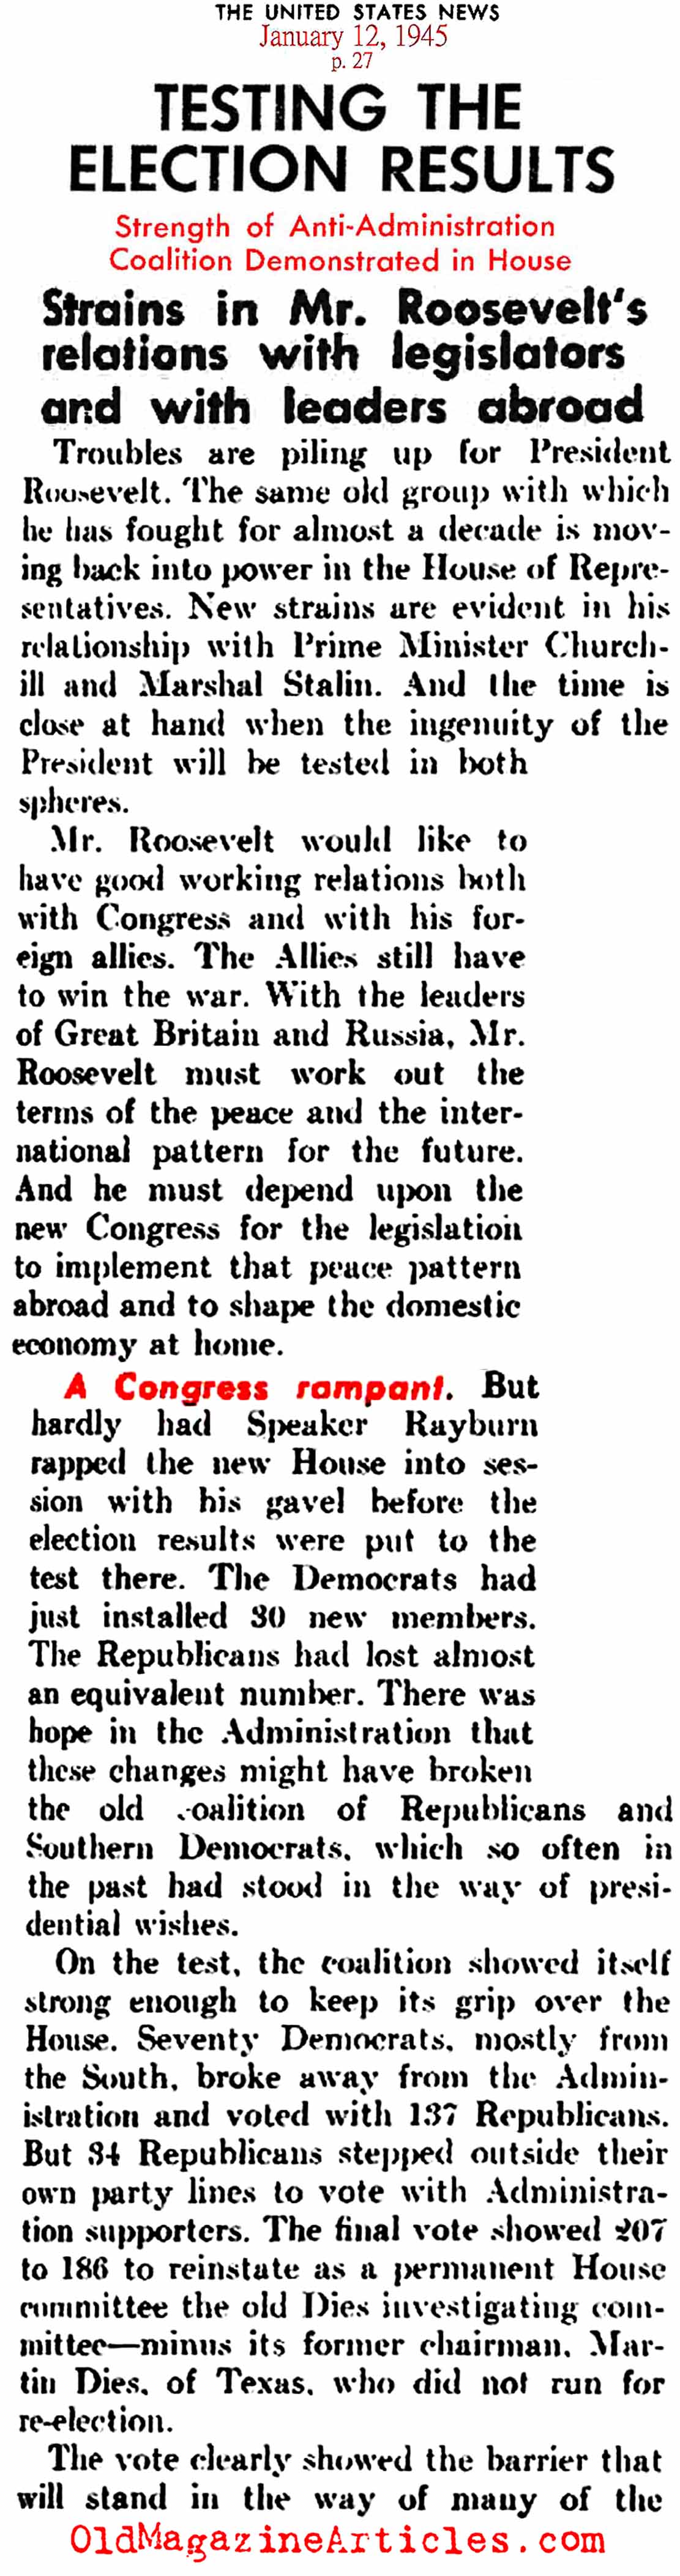 FDR and the House Republicans (United States News, 1944)